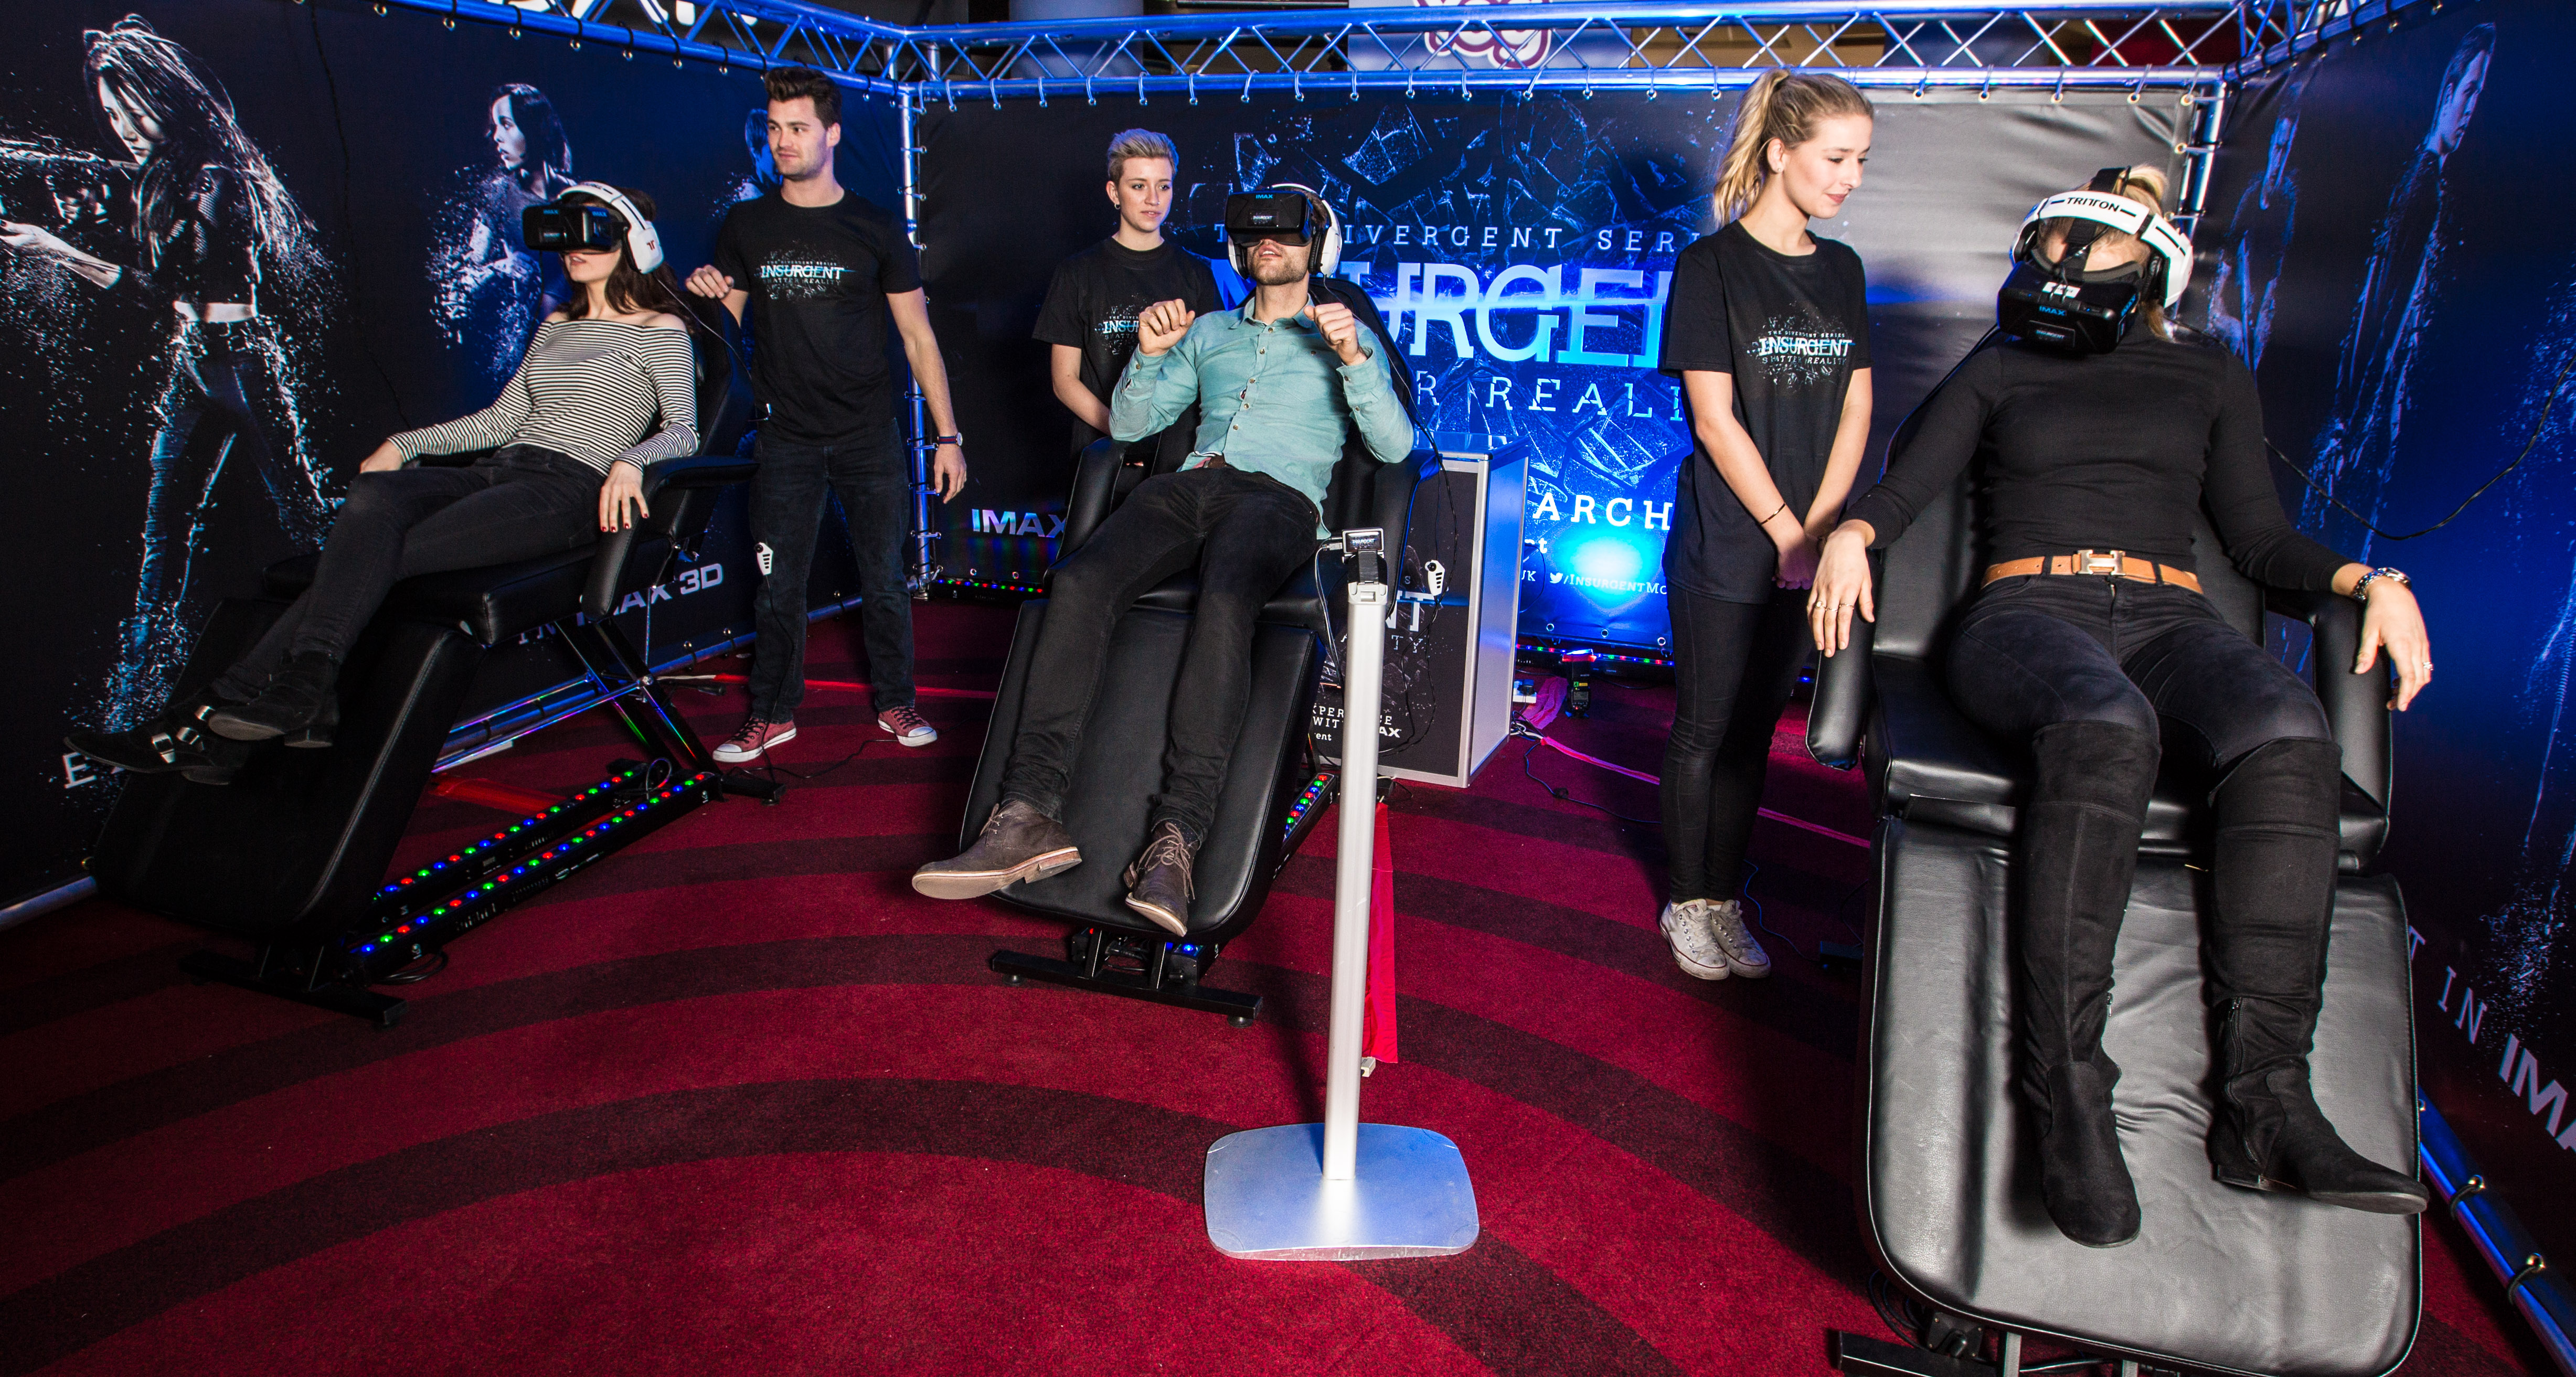 IMAX launches virtual reality movie experience - VRExtasy